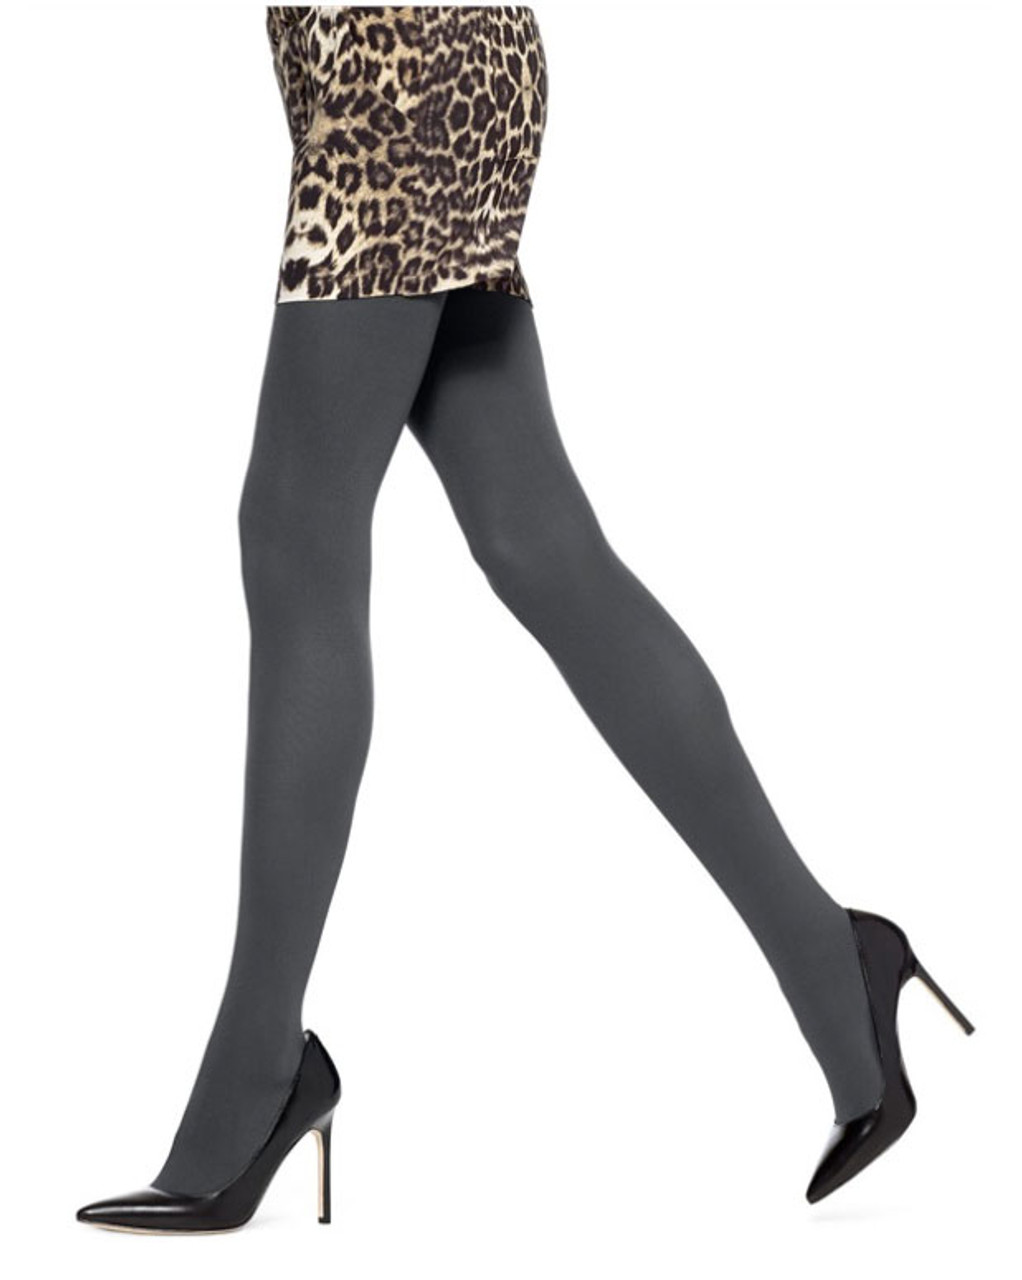 Super Opaque Smooth Control Tights - Firecracker - Set Me Free